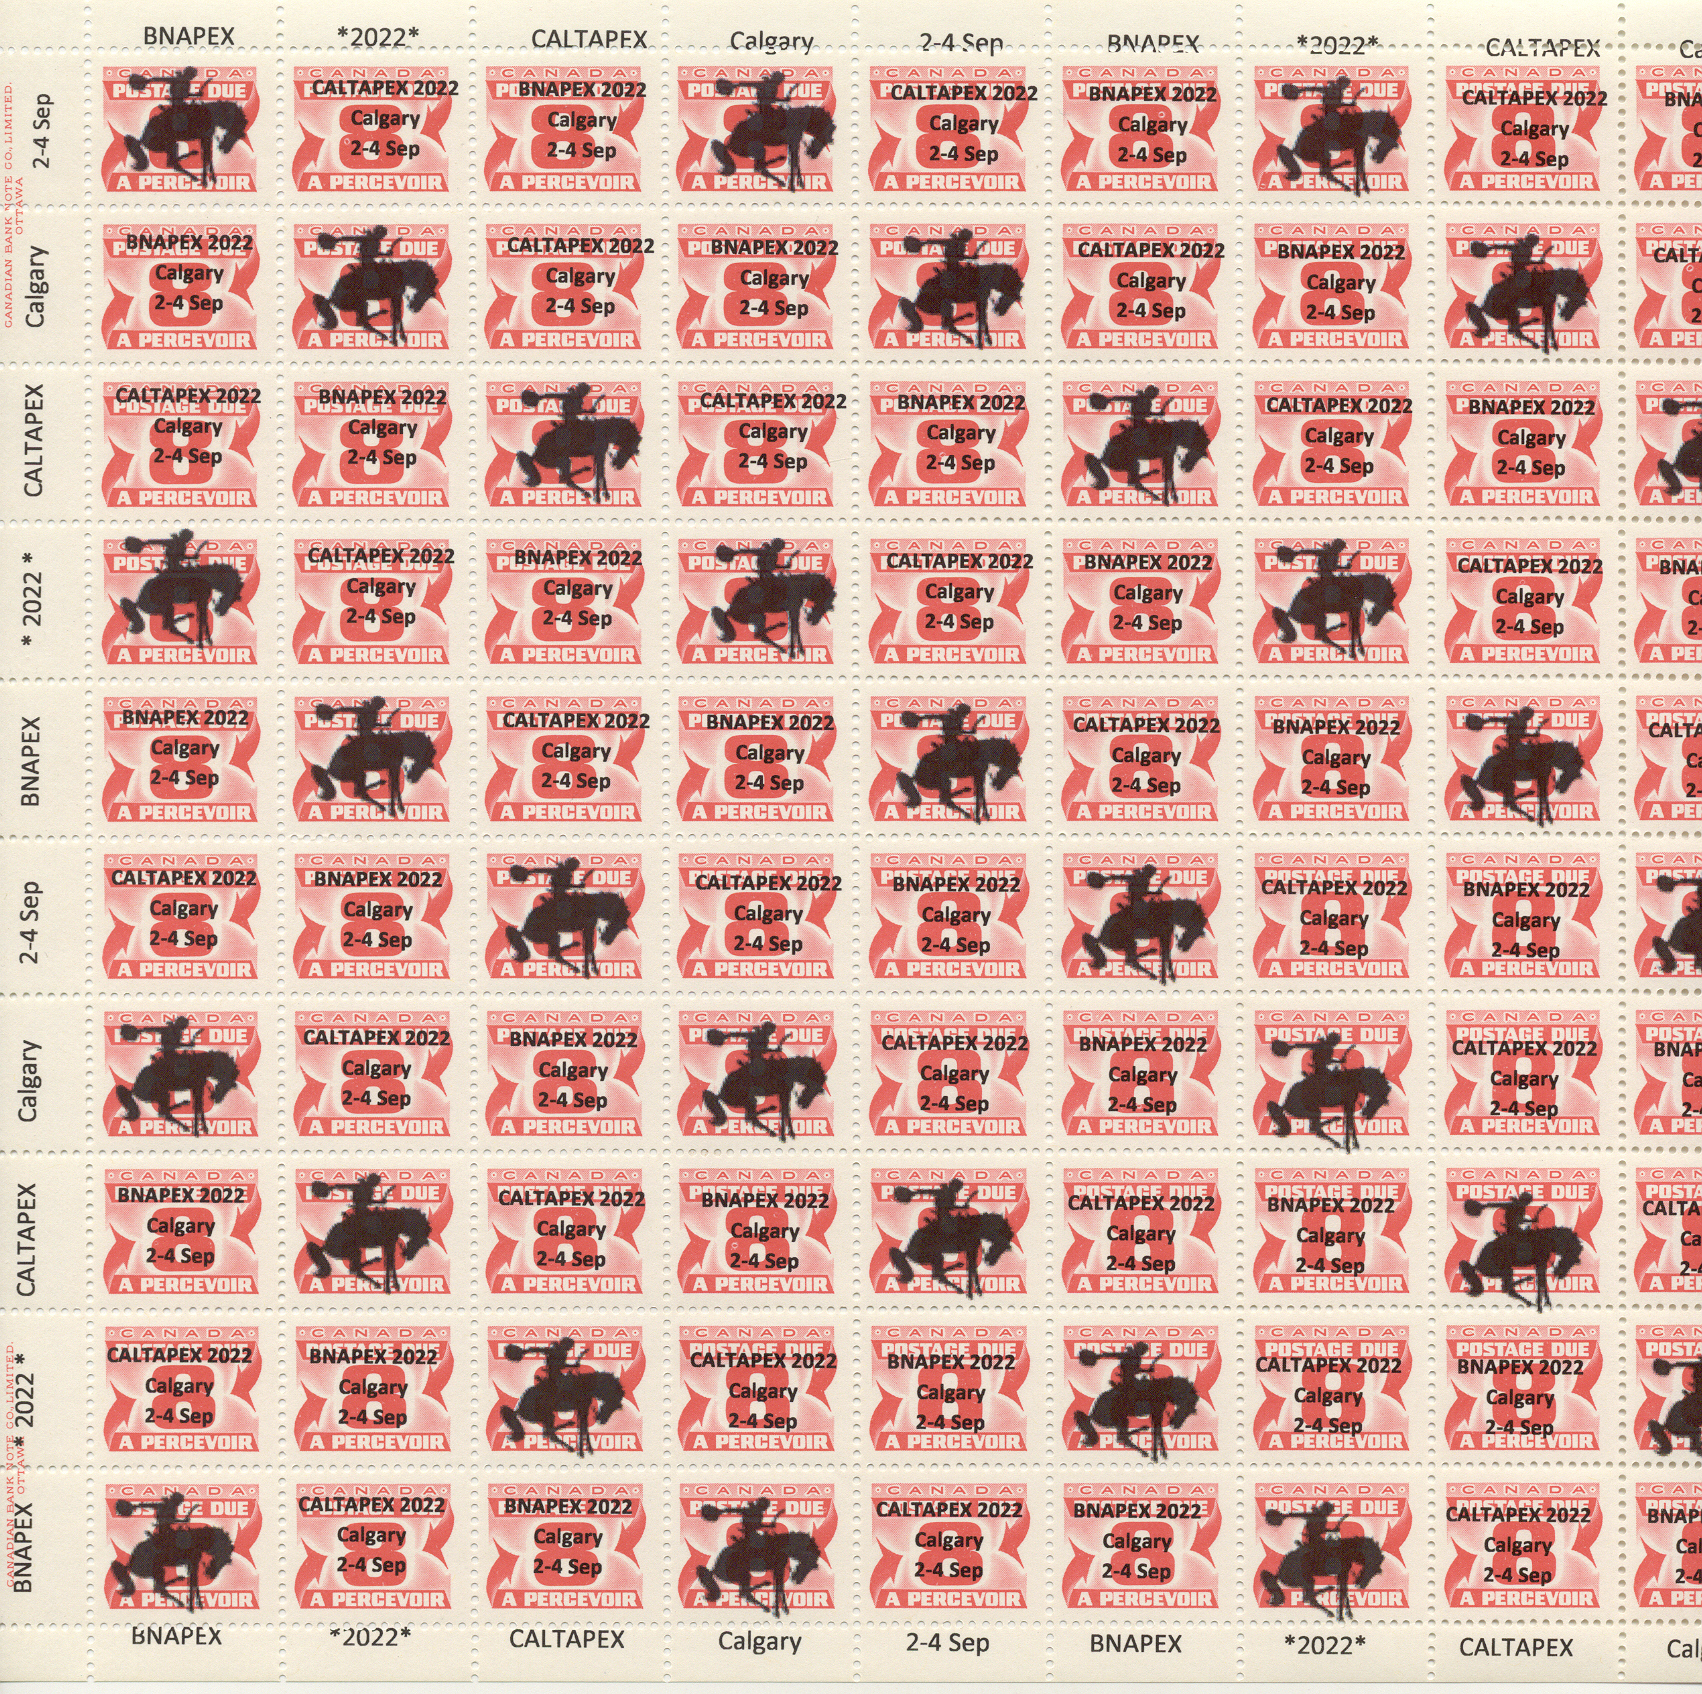 Sheet of the Precancelled Postage Due Perf 12.5x12 (J34a) overprinted to
                     Commemorate BNAPEX in Calgary 2022